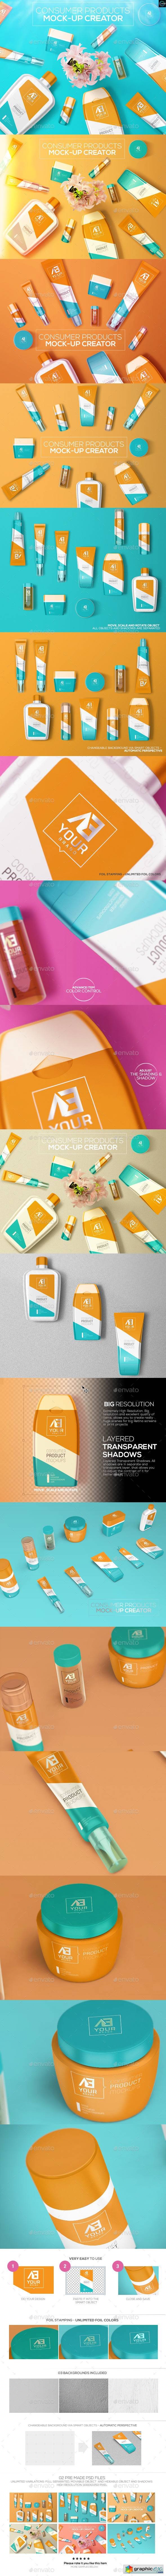 Consumer Products Mock-up